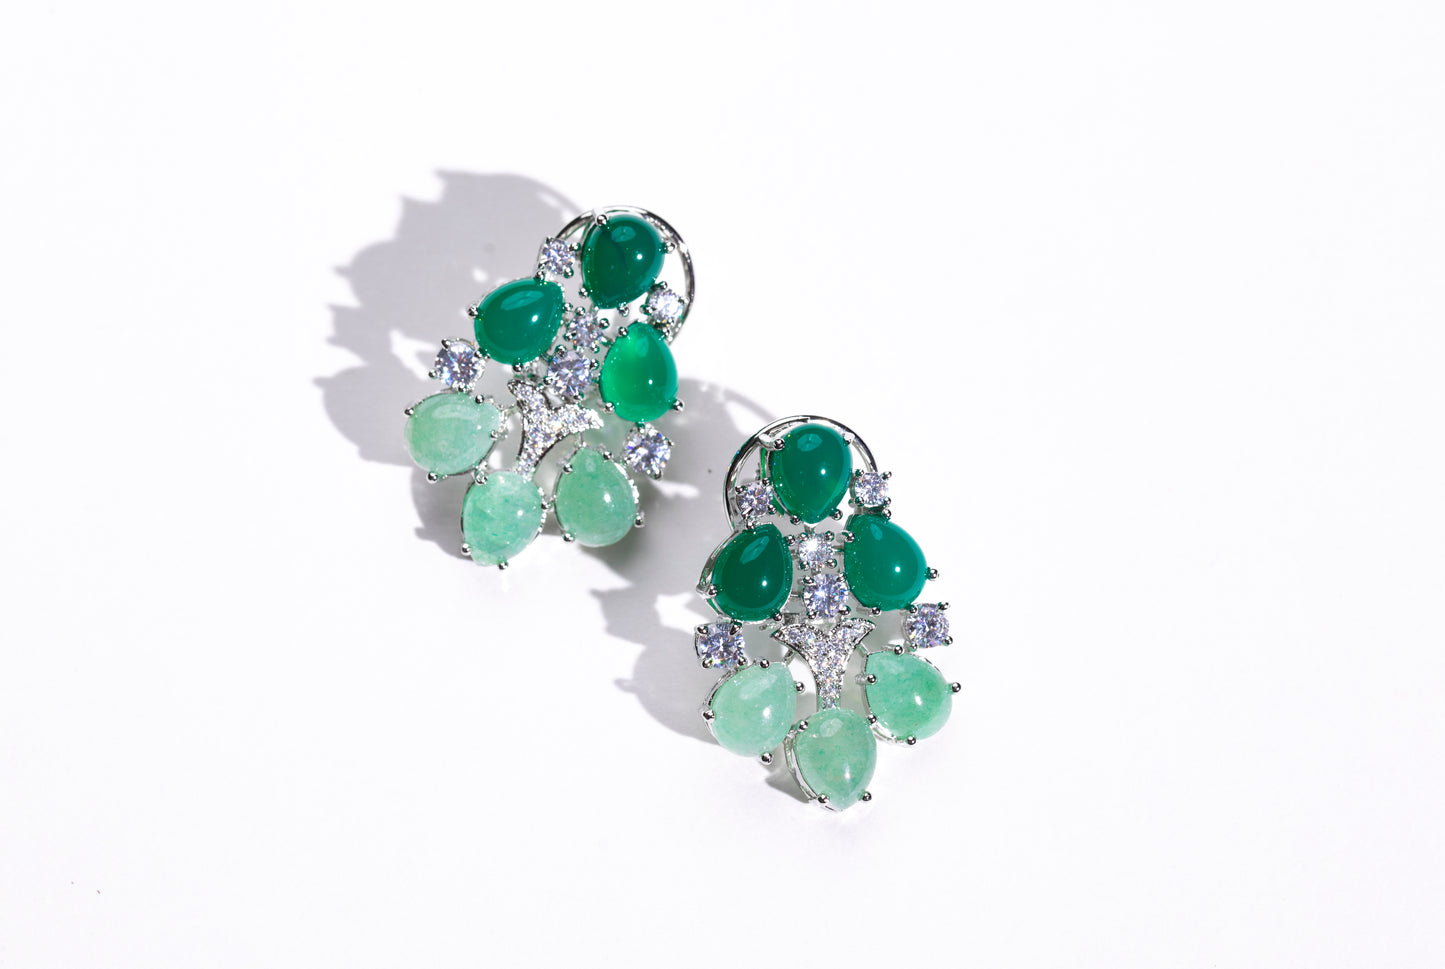 Versatile Designer Earrings: The perfect accessory to complement your outfit, day or night.